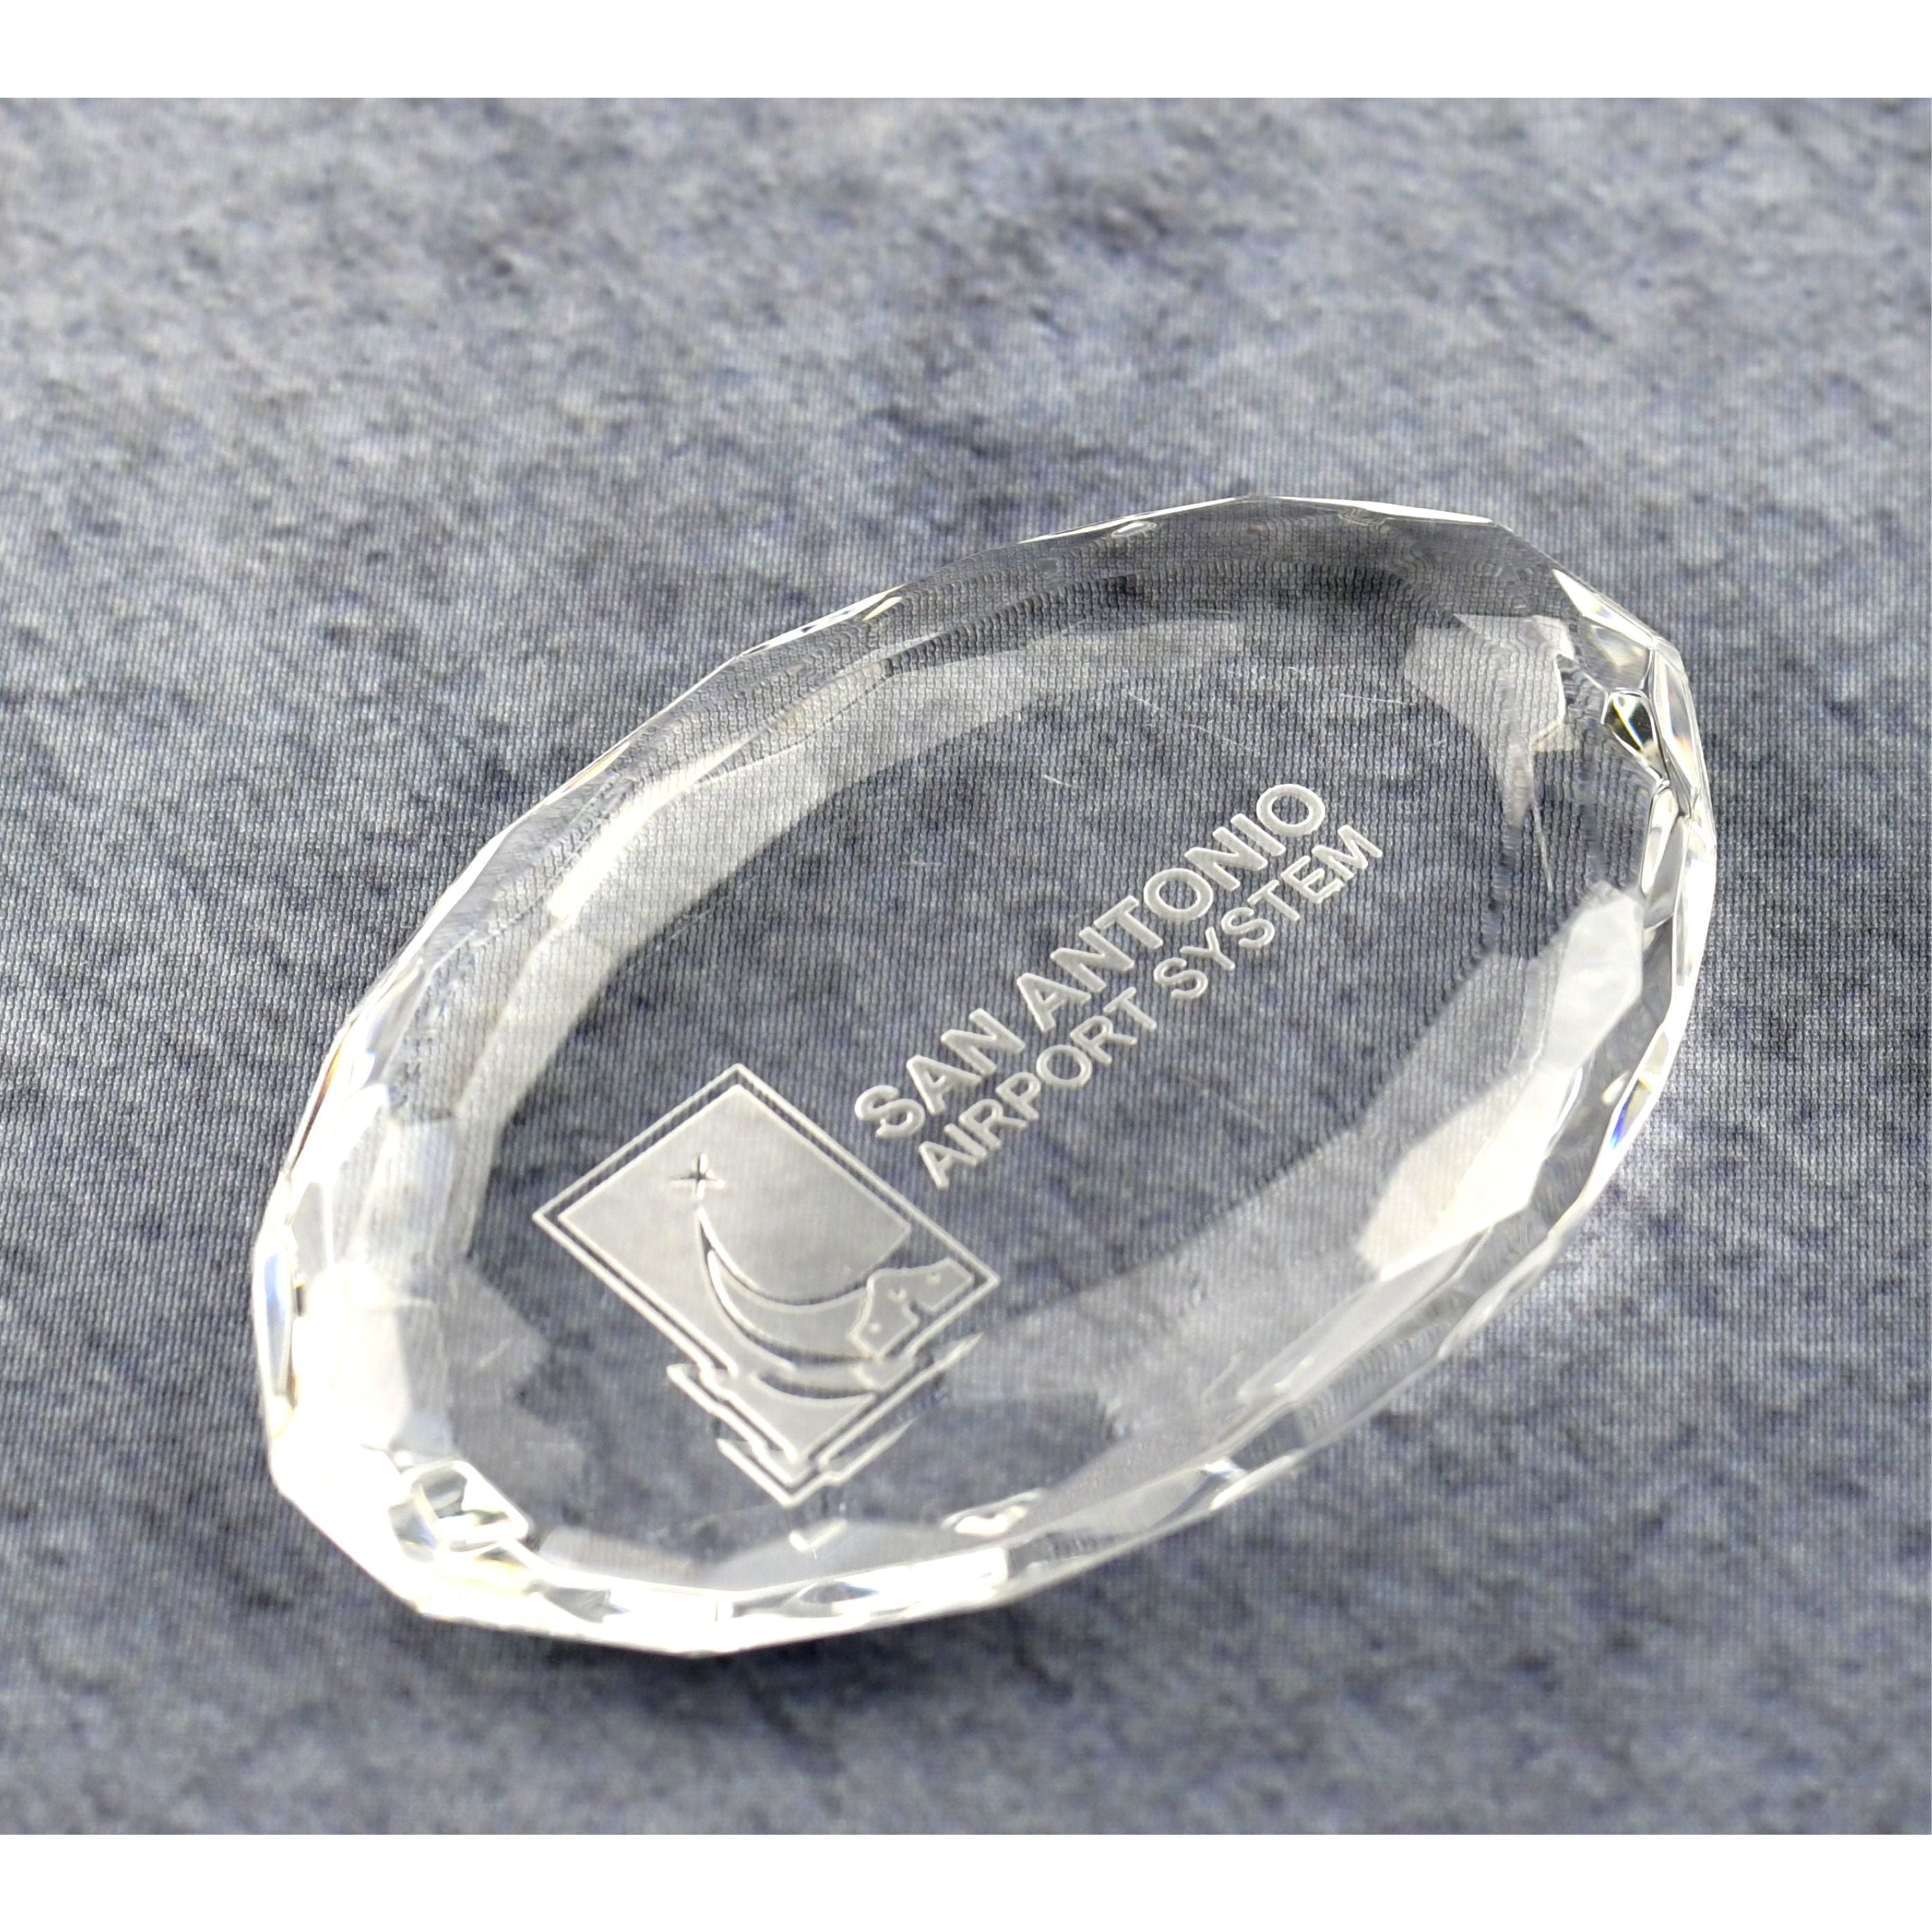 Crystal Oval Multi-Faceted Paperweight | Alliance Awards LLC.